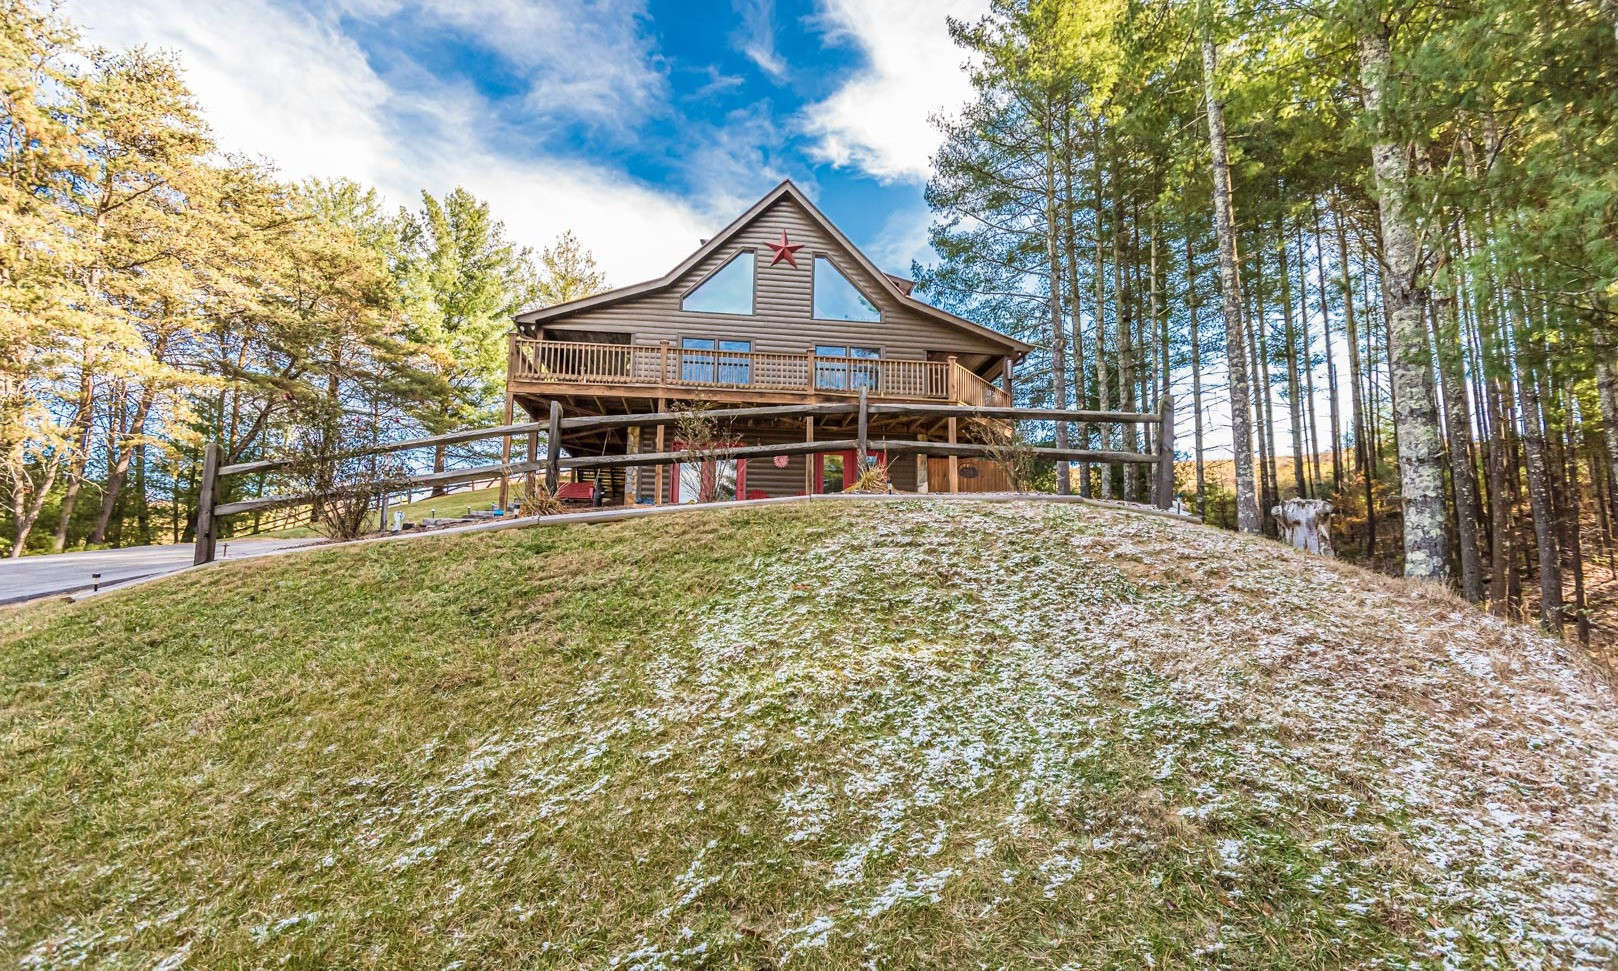 Offered at $325,000, this stunning 3-bedroom, 3-bath log cabin resting on a 2.21 acre setting in Prime Mountain Estates, is the ideal selection for your private mountain retreat cabin. Call today for more information on listing A162.